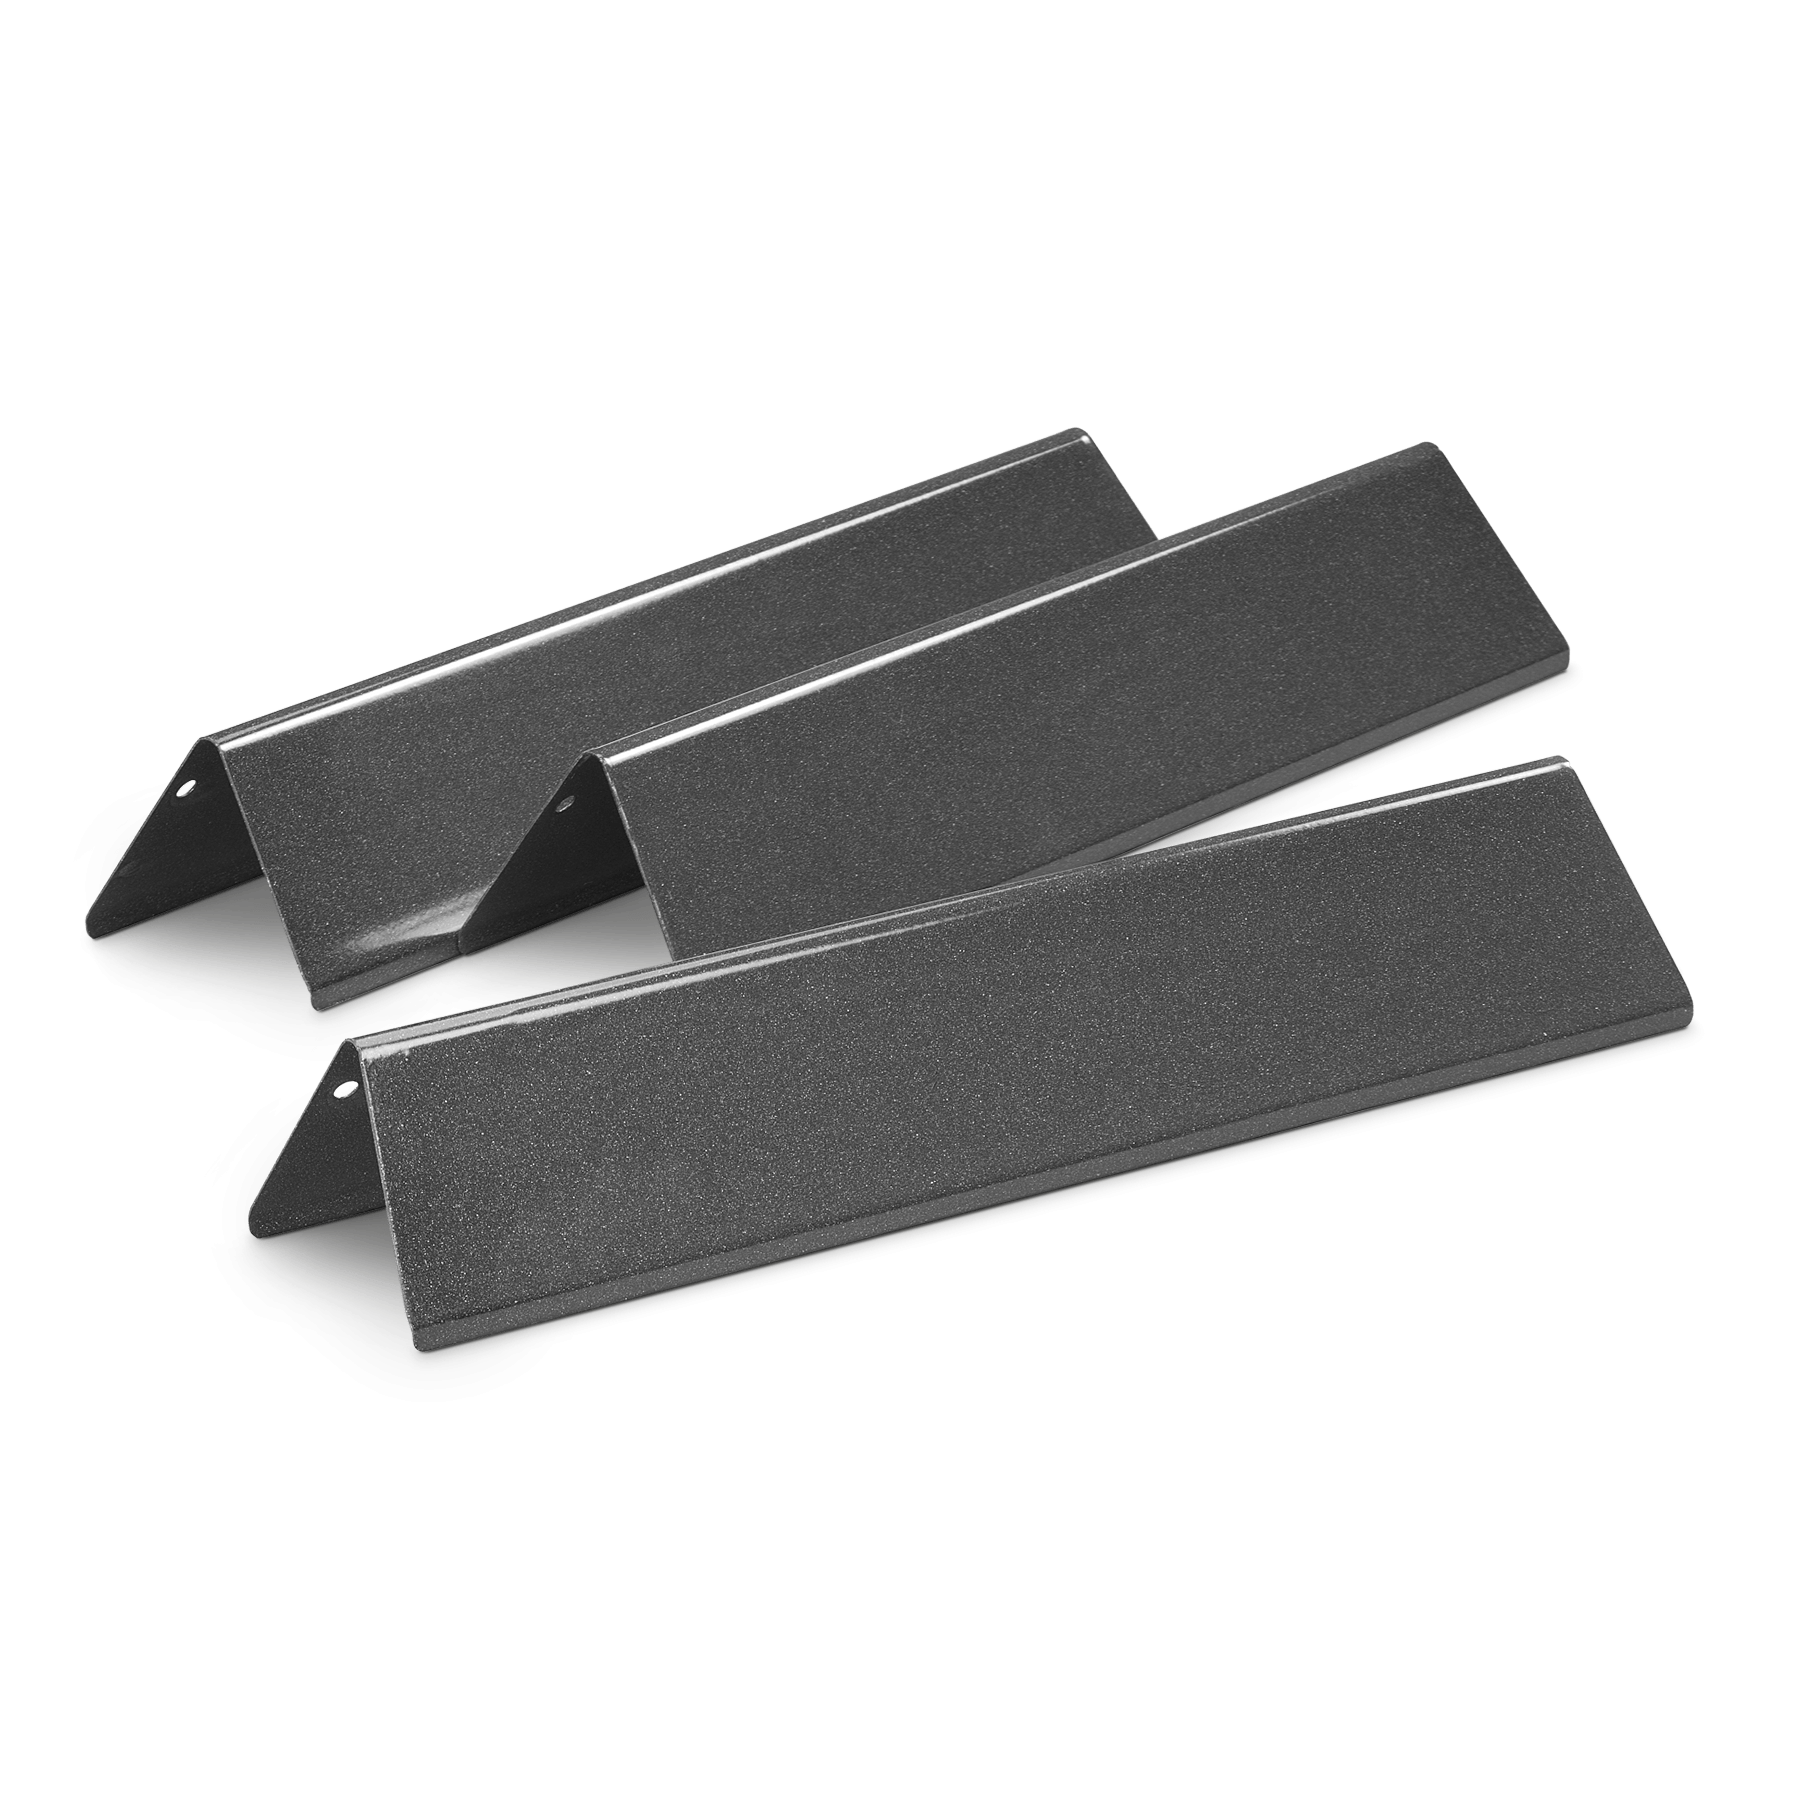 Set of 3 Stainless Steel Flavor Bars LOKHING 7635 Flavorizer Bars Replacement for Weber Spirit E210 Grill Parts for Spirit 200/210 Parts Spirit E210 S210 Flavorizer with Front-Control 